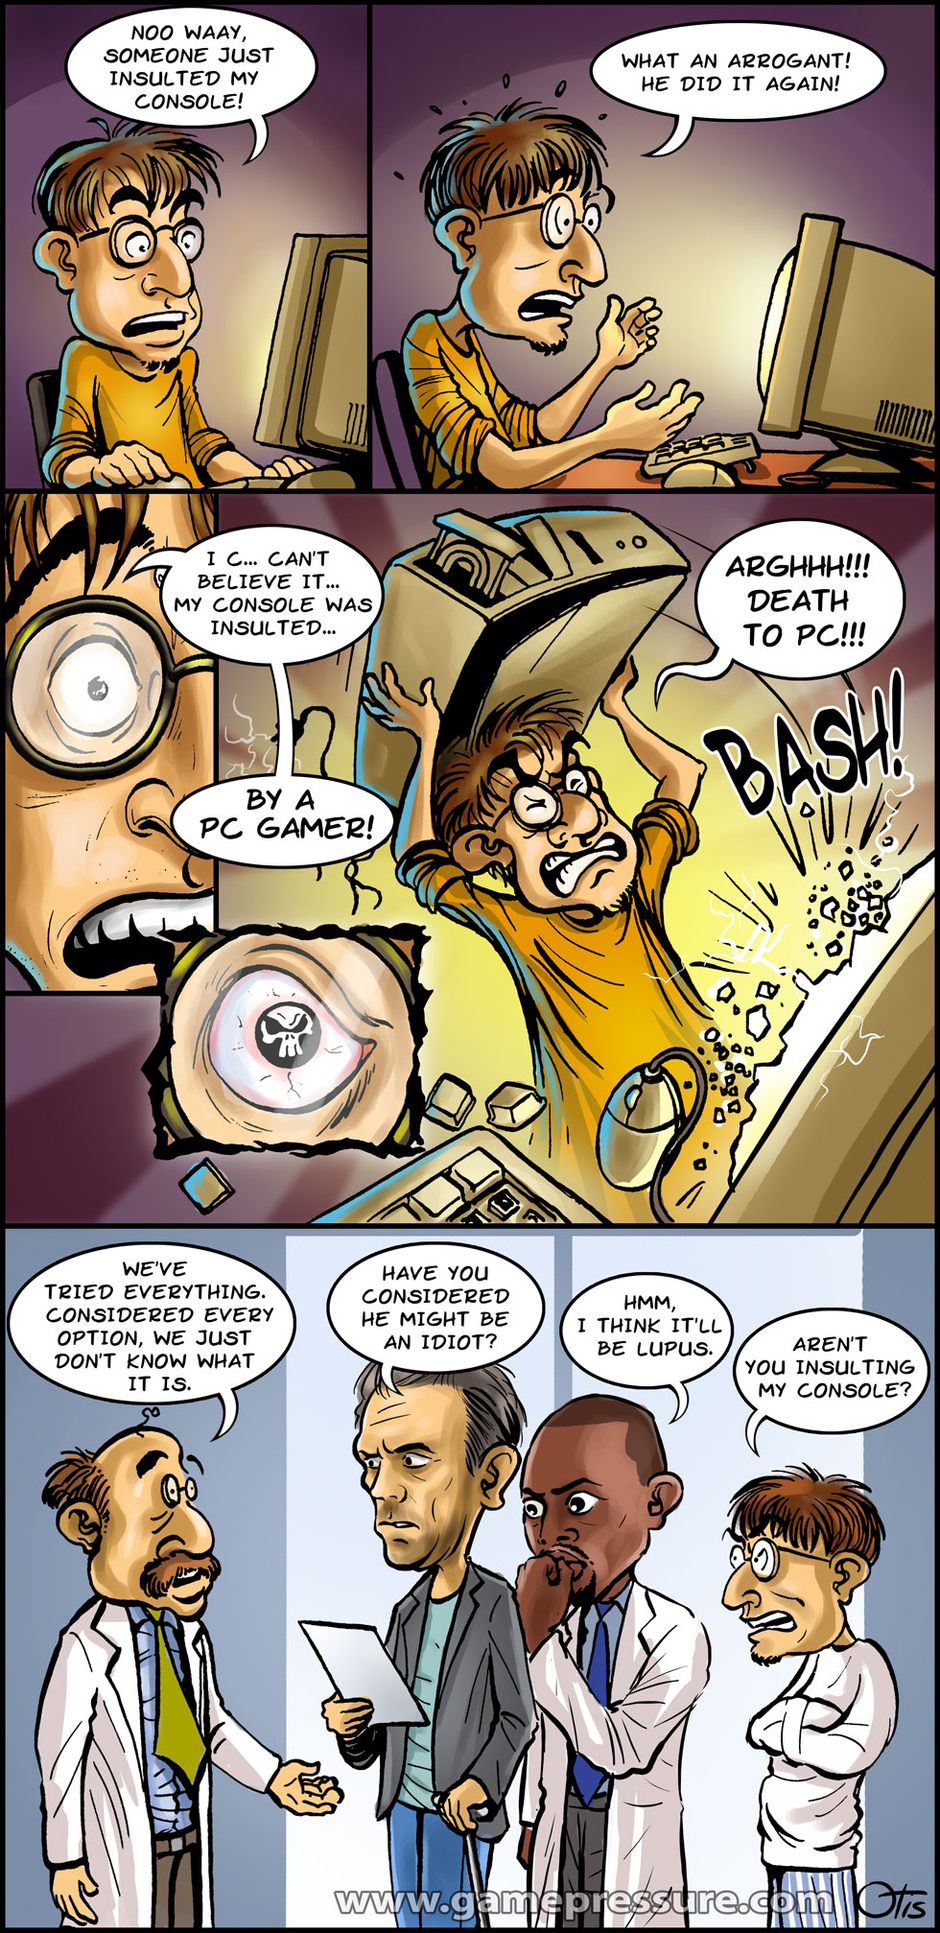 Fight on Fanboy!, comics Cartoon Games, #10. What can cause fanboyism?